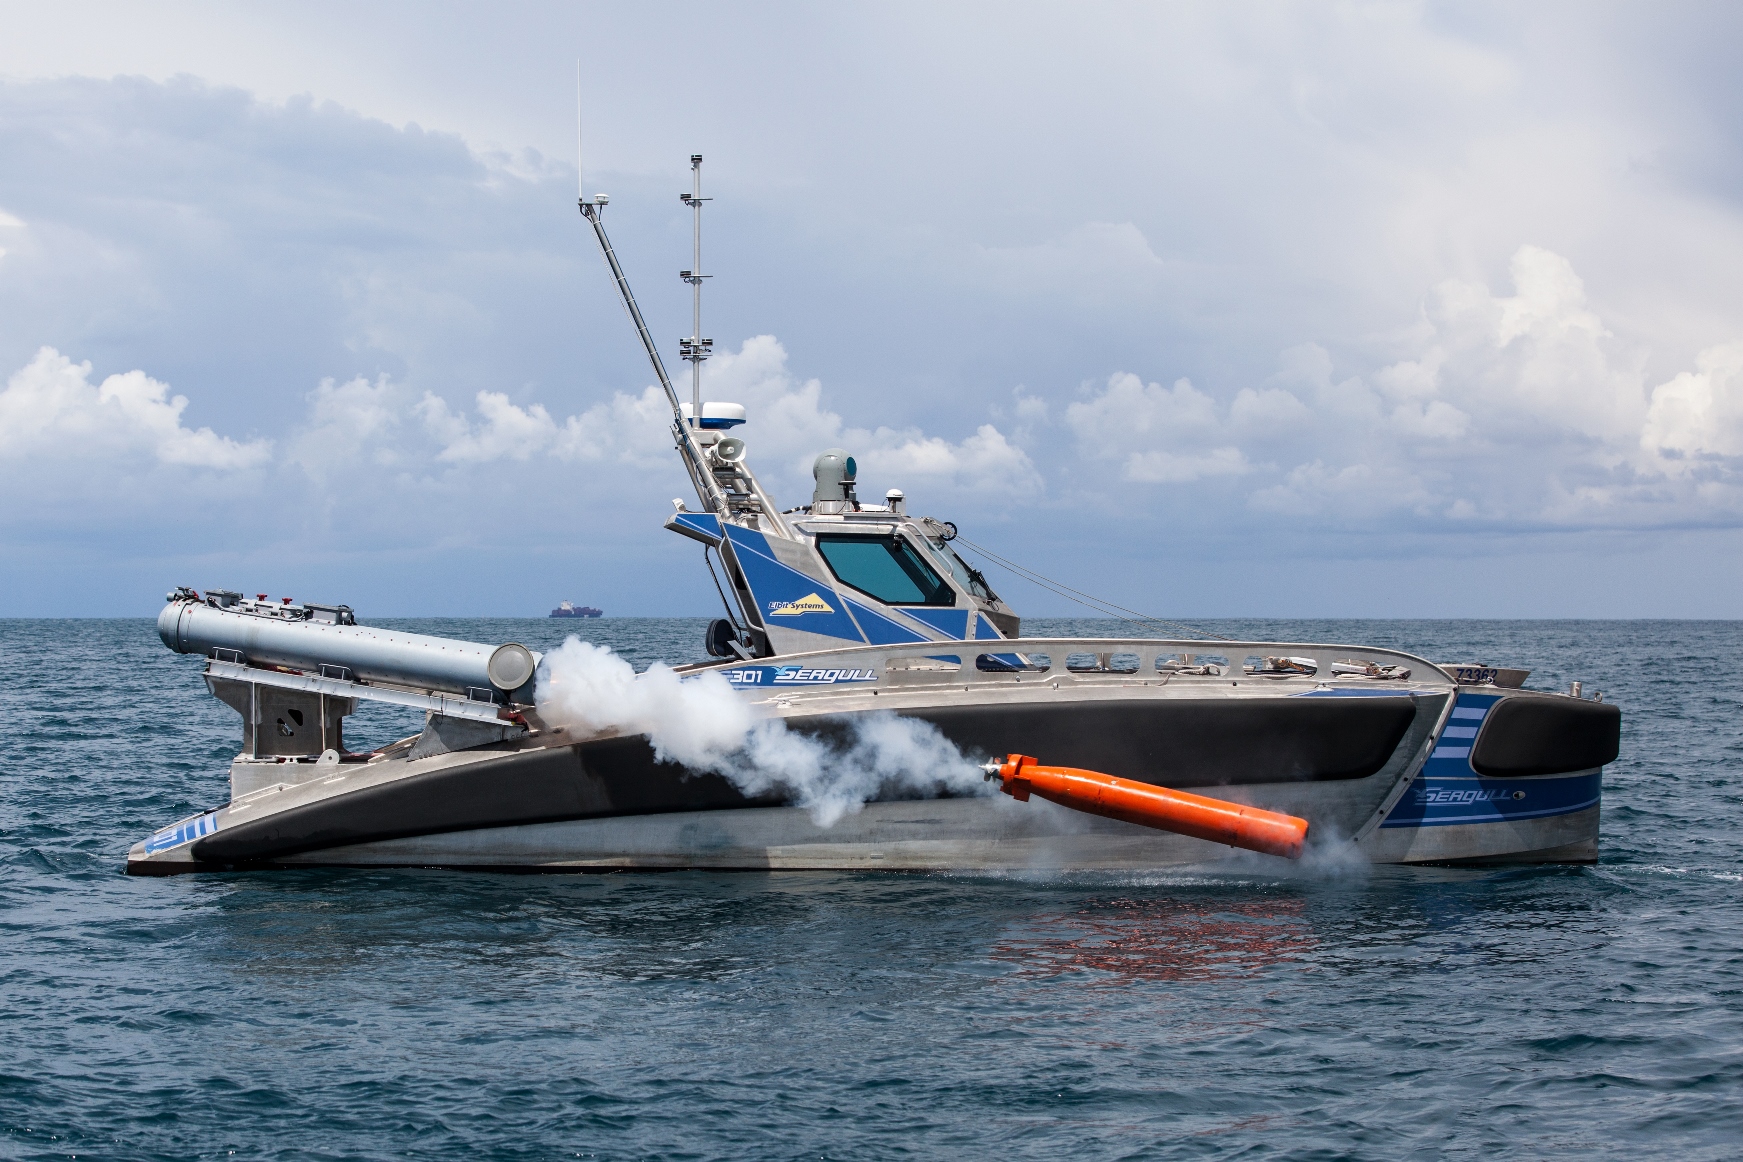 The deal includes Elbit Systems' Seagull USVs (Unmanned Surface Vessels) configured to perform Anti-Submarine Warfare (ASW) missions. Picture by Galina Kantor. Click to enlarge.